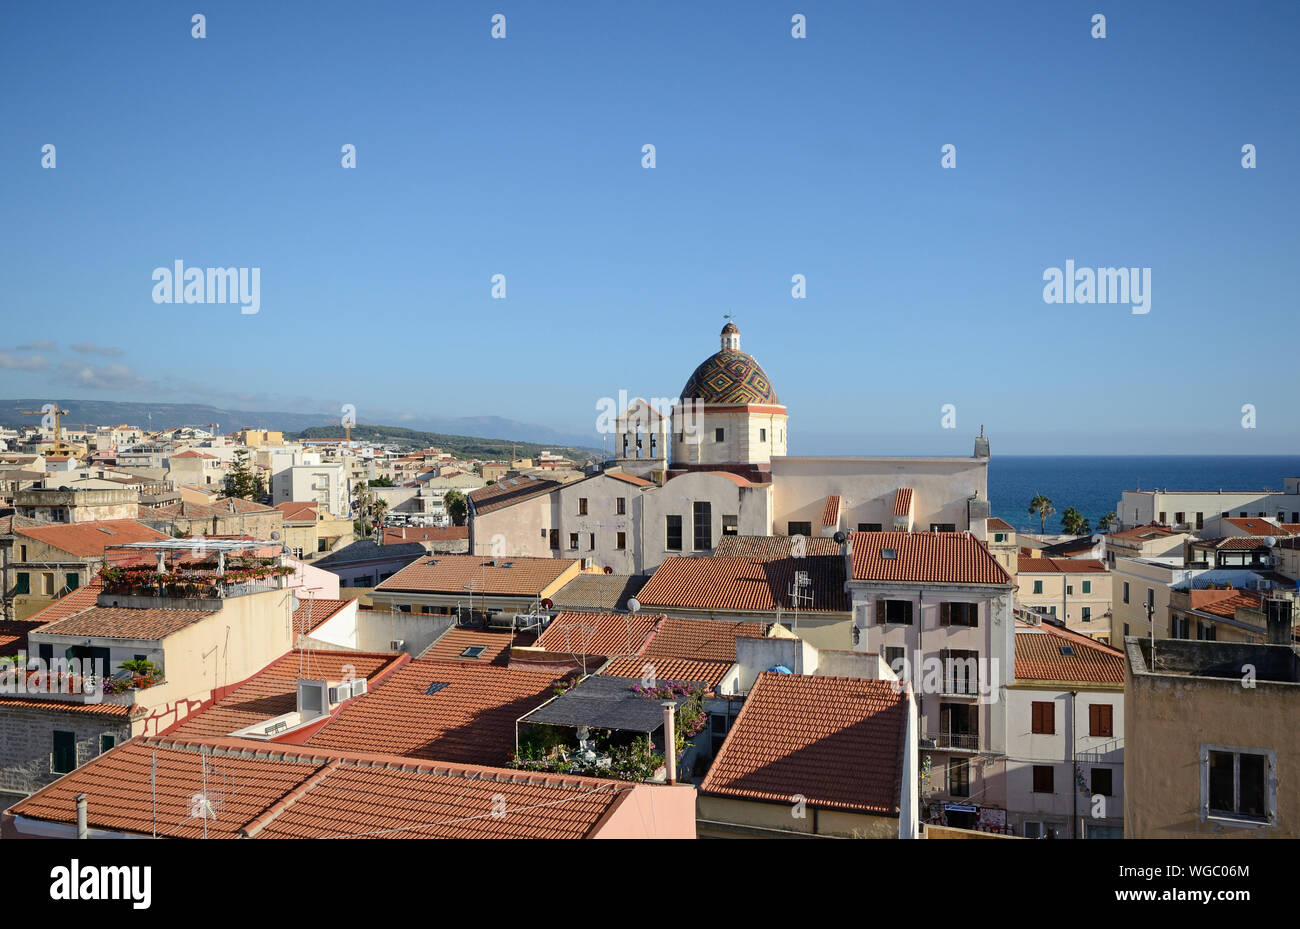 Aerial view of Alghero, city of Sardinia, with the majolica dome of the church of San Michele in evidence, and the sea in the background Stock Photo